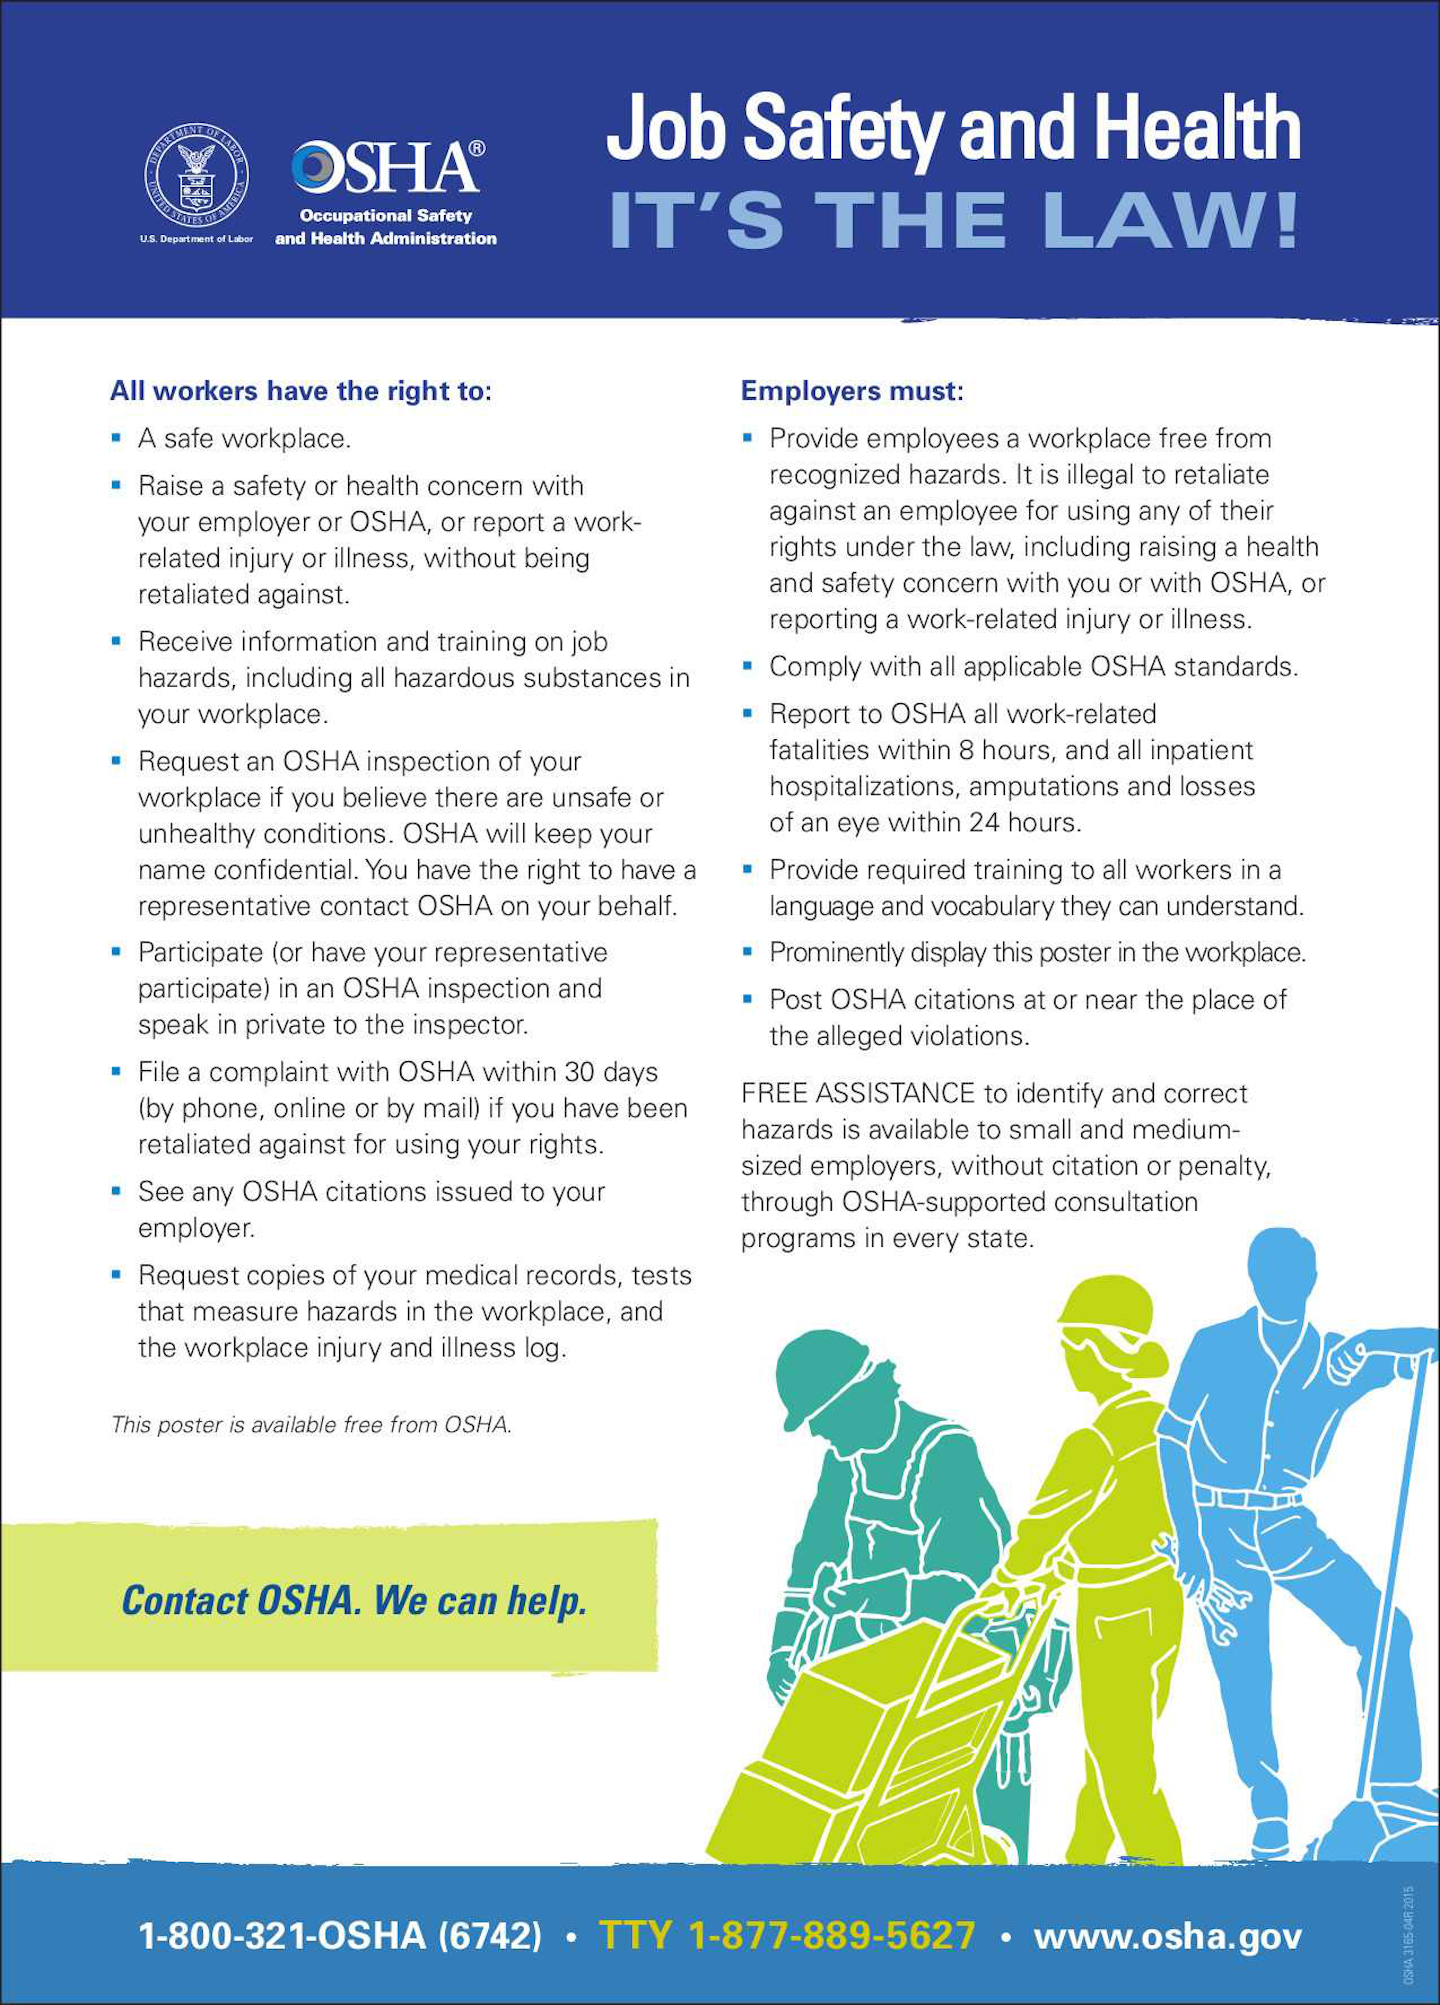 required-osha-poster-updated-available-for-download-total-landscape-care